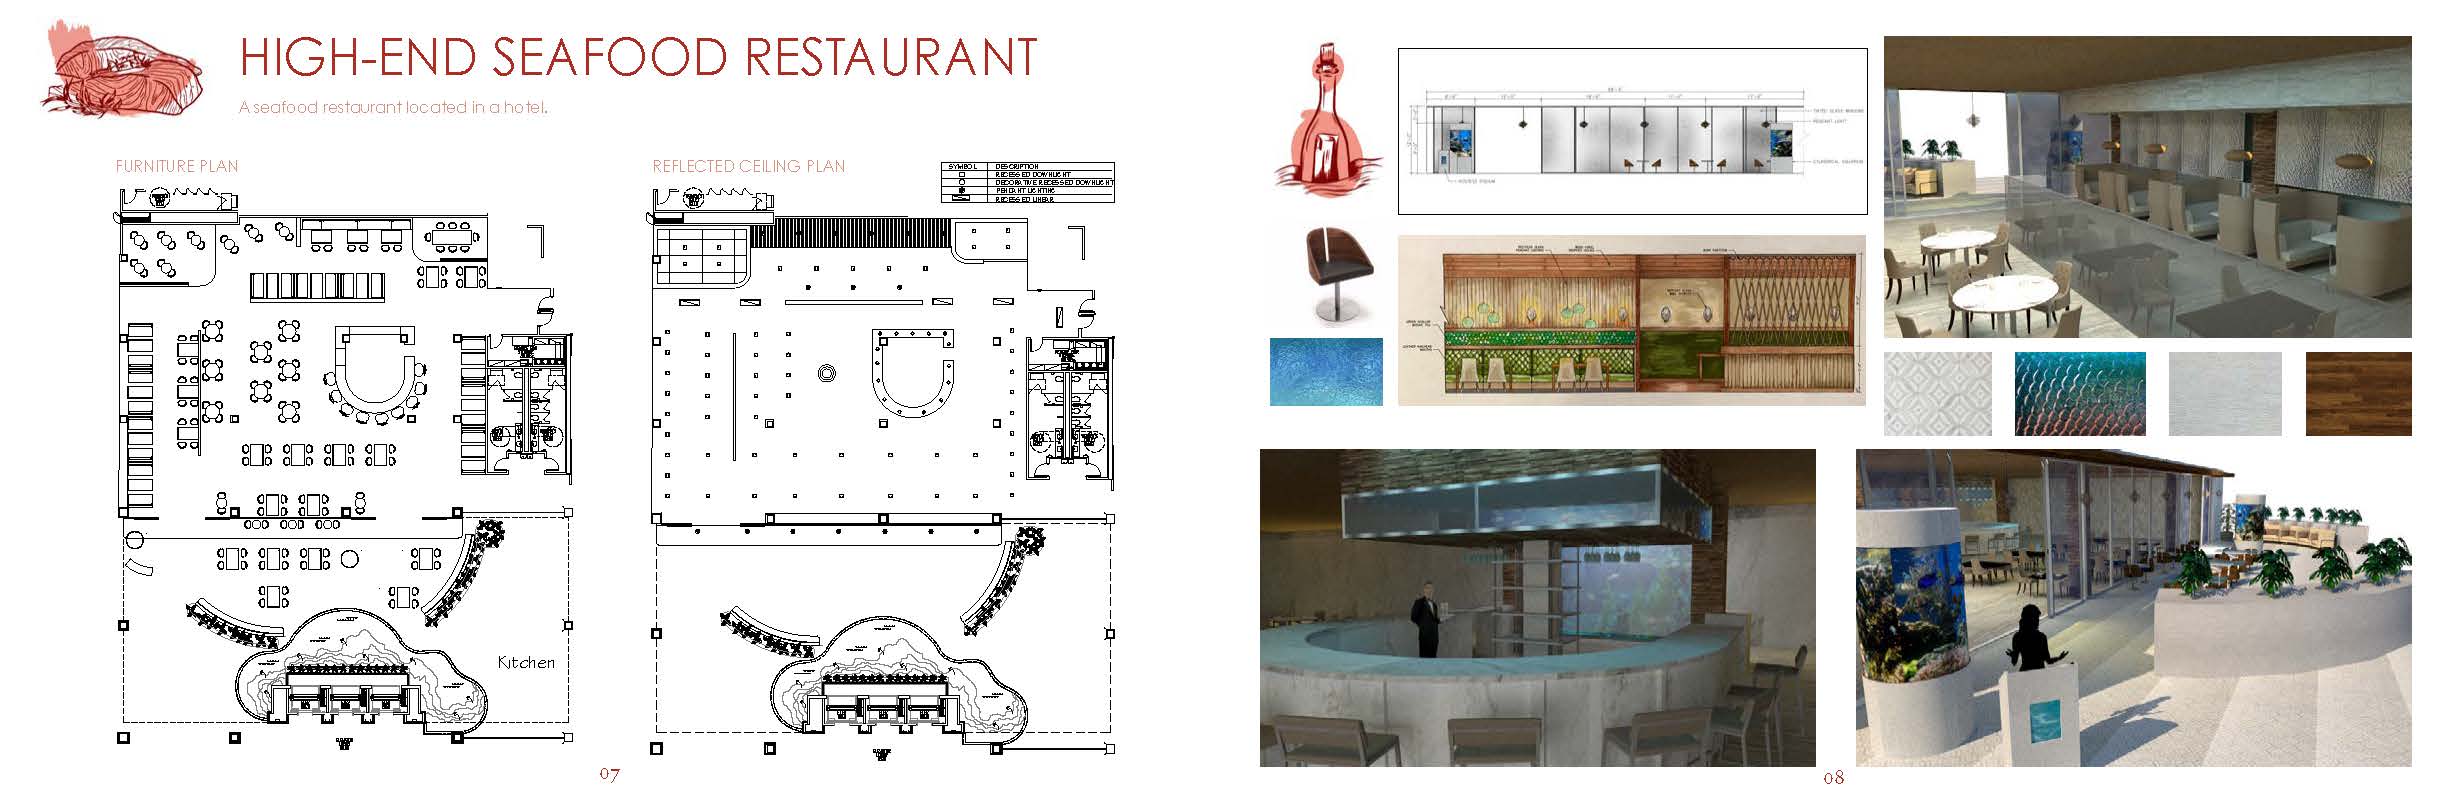 Furniture plan , reflcted ceiling plan, and interior designs for high-end seafood restaurant